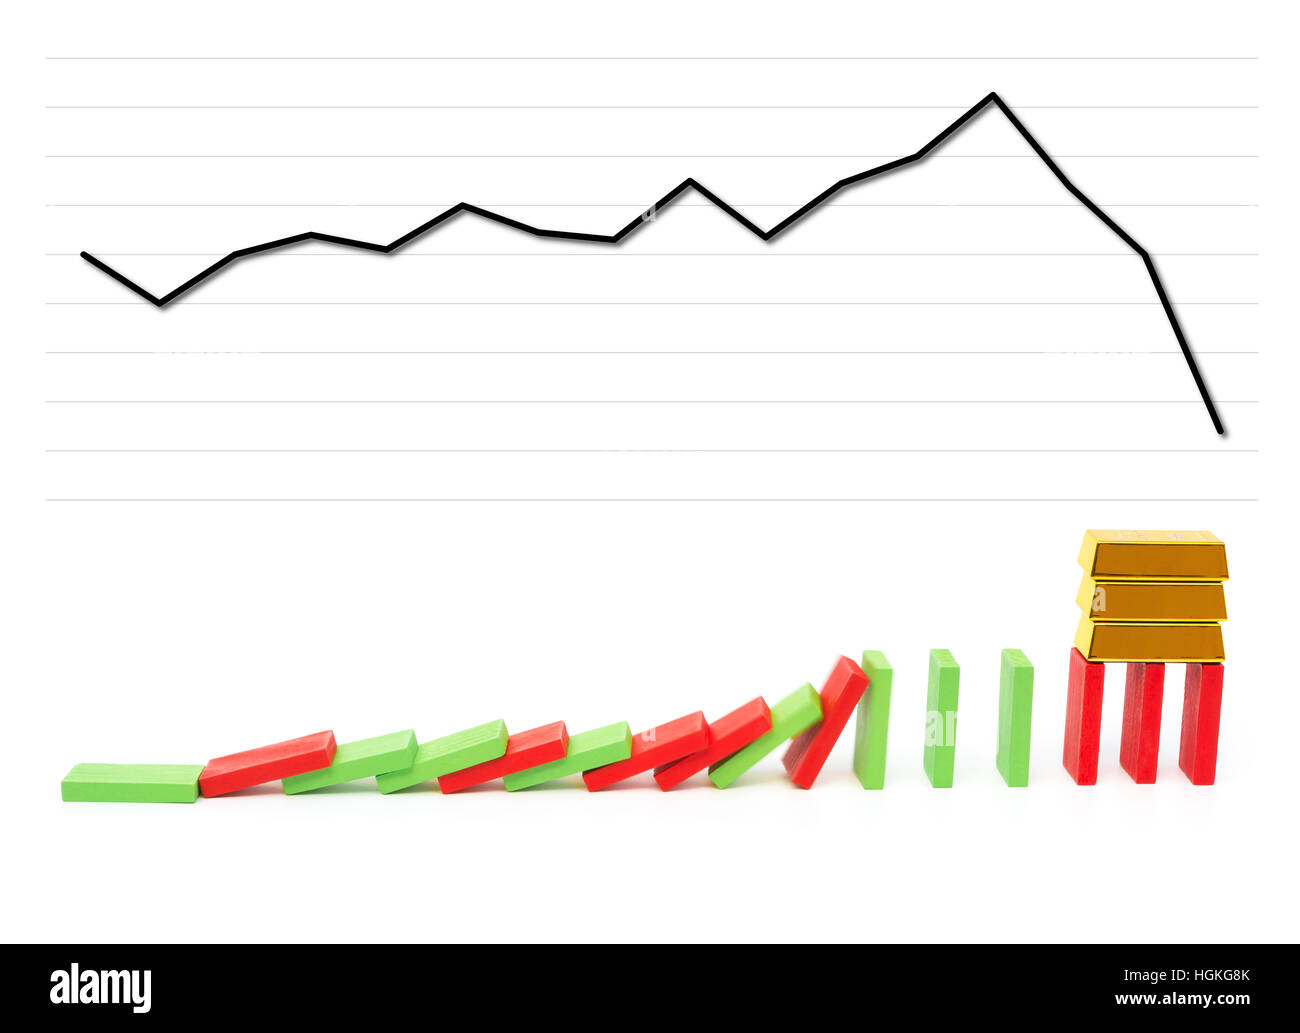 gold bars standing on falling dominos with a falling chart on background as a monetary concept Stock Photo